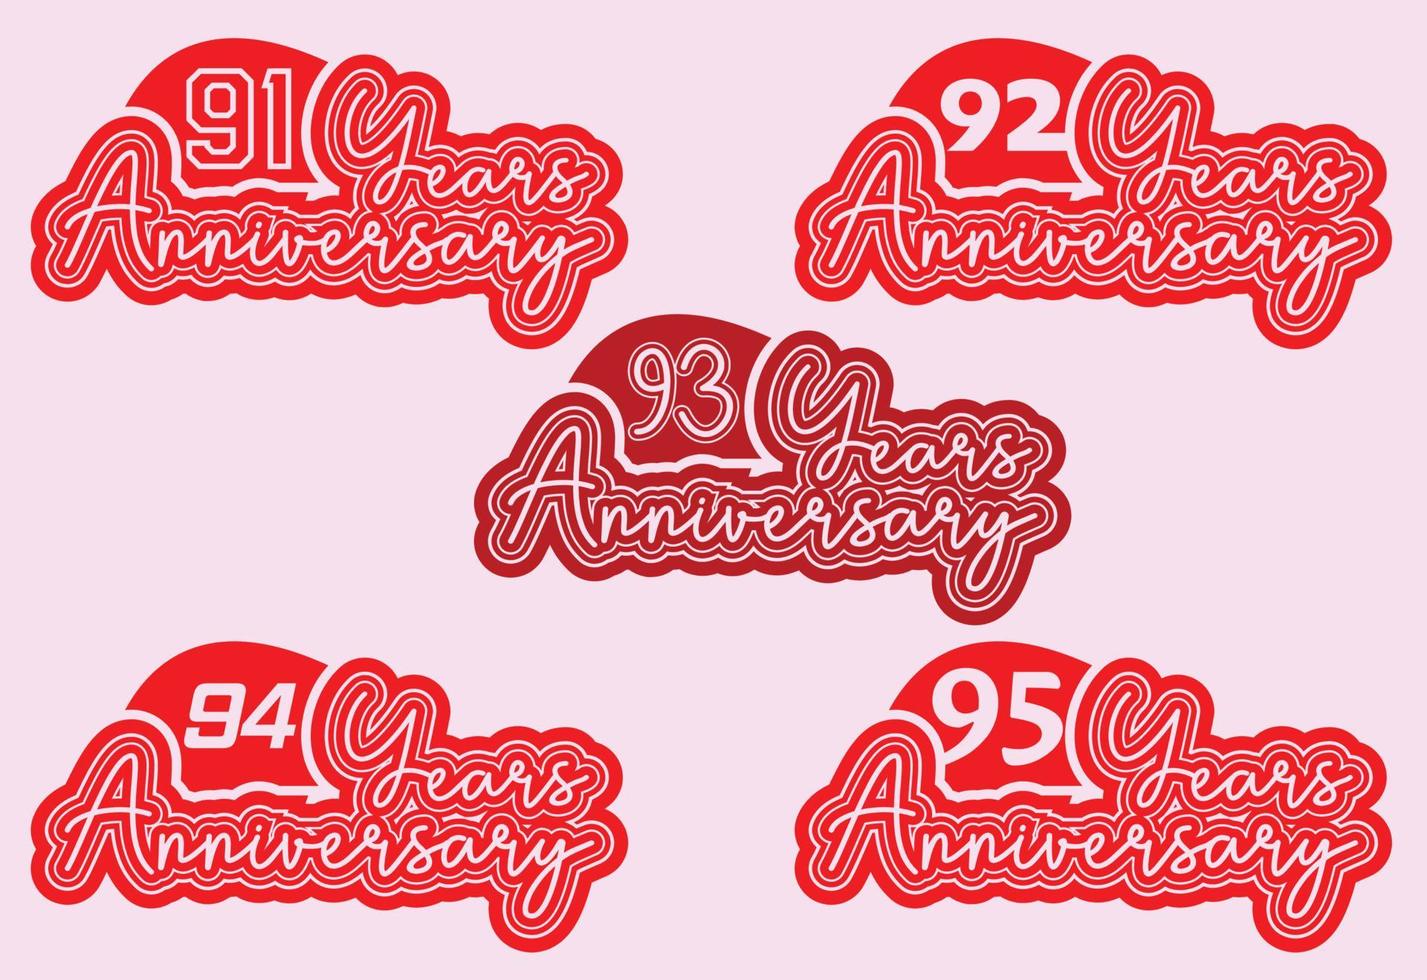 91 to 95 years anniversary logo and sticker design vector